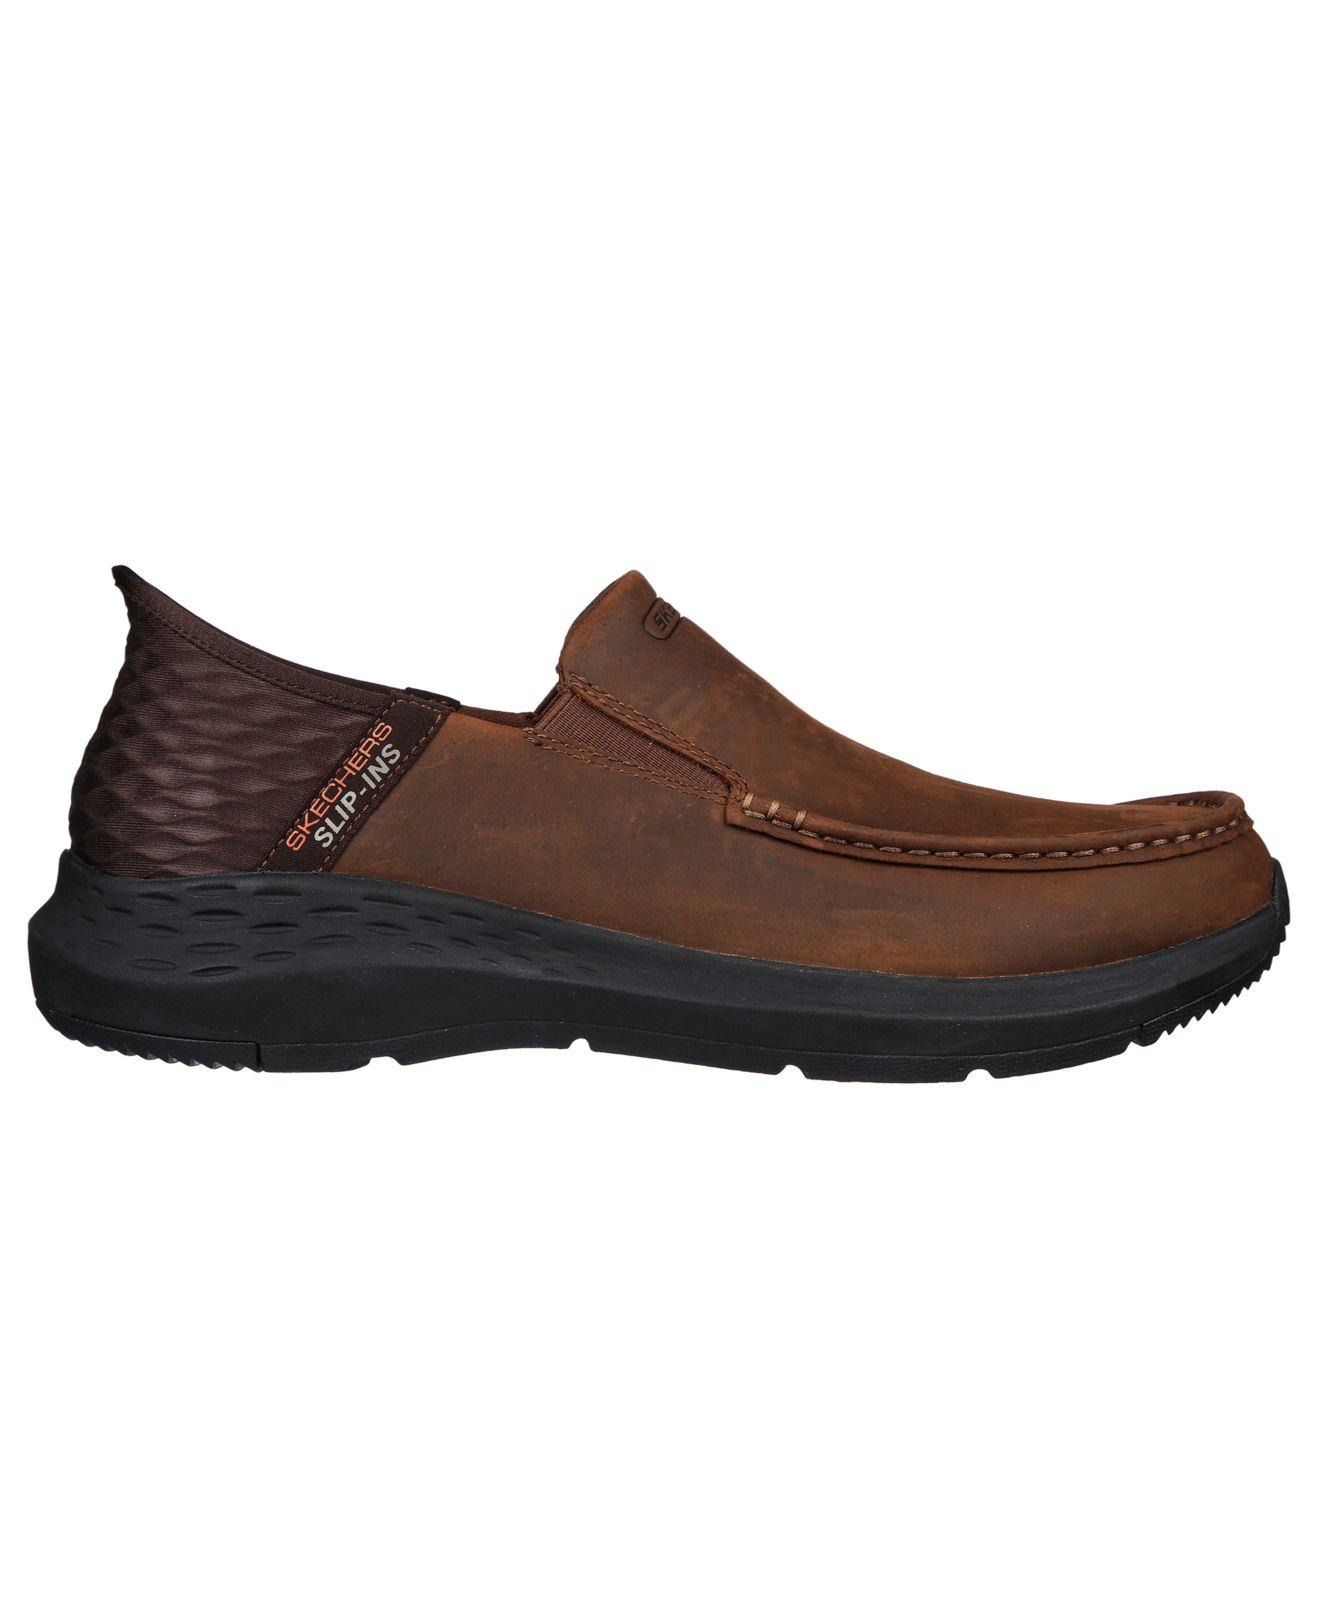 Skechers Men's Brown Slip-ins Relaxed Fit- Parson - Oswin Slip-on Moc Toe  Casual Sneakers From Finish Line